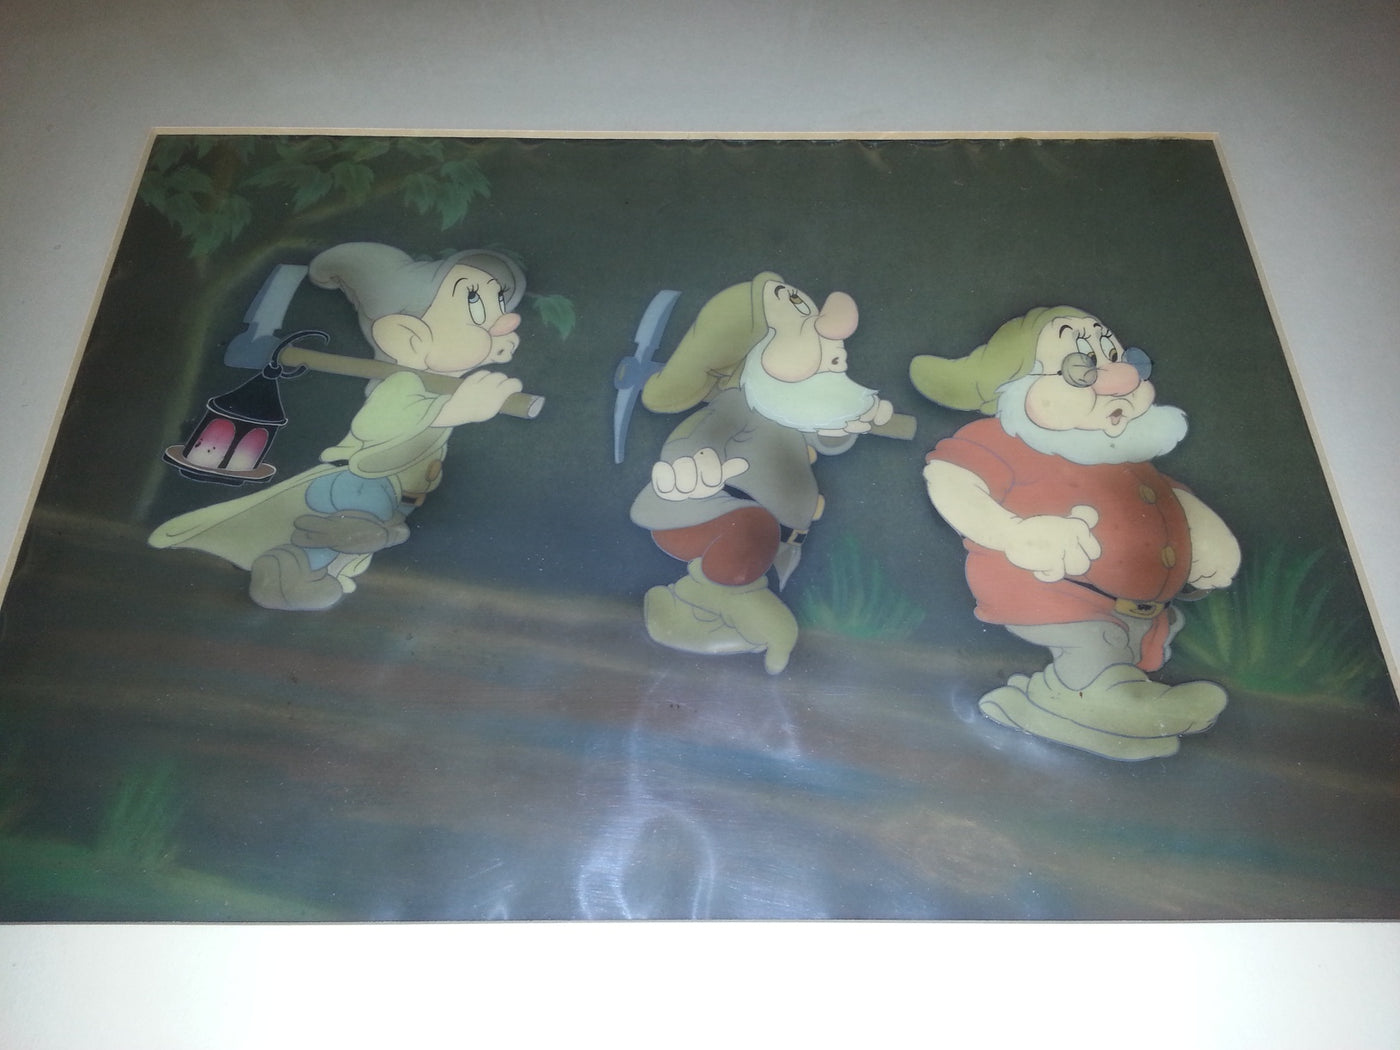 Original Walt Disney Production Cel on Courvoisier Background from Snow White and the Seven Dwarfs featuring Dopey, Sneezy and Doc